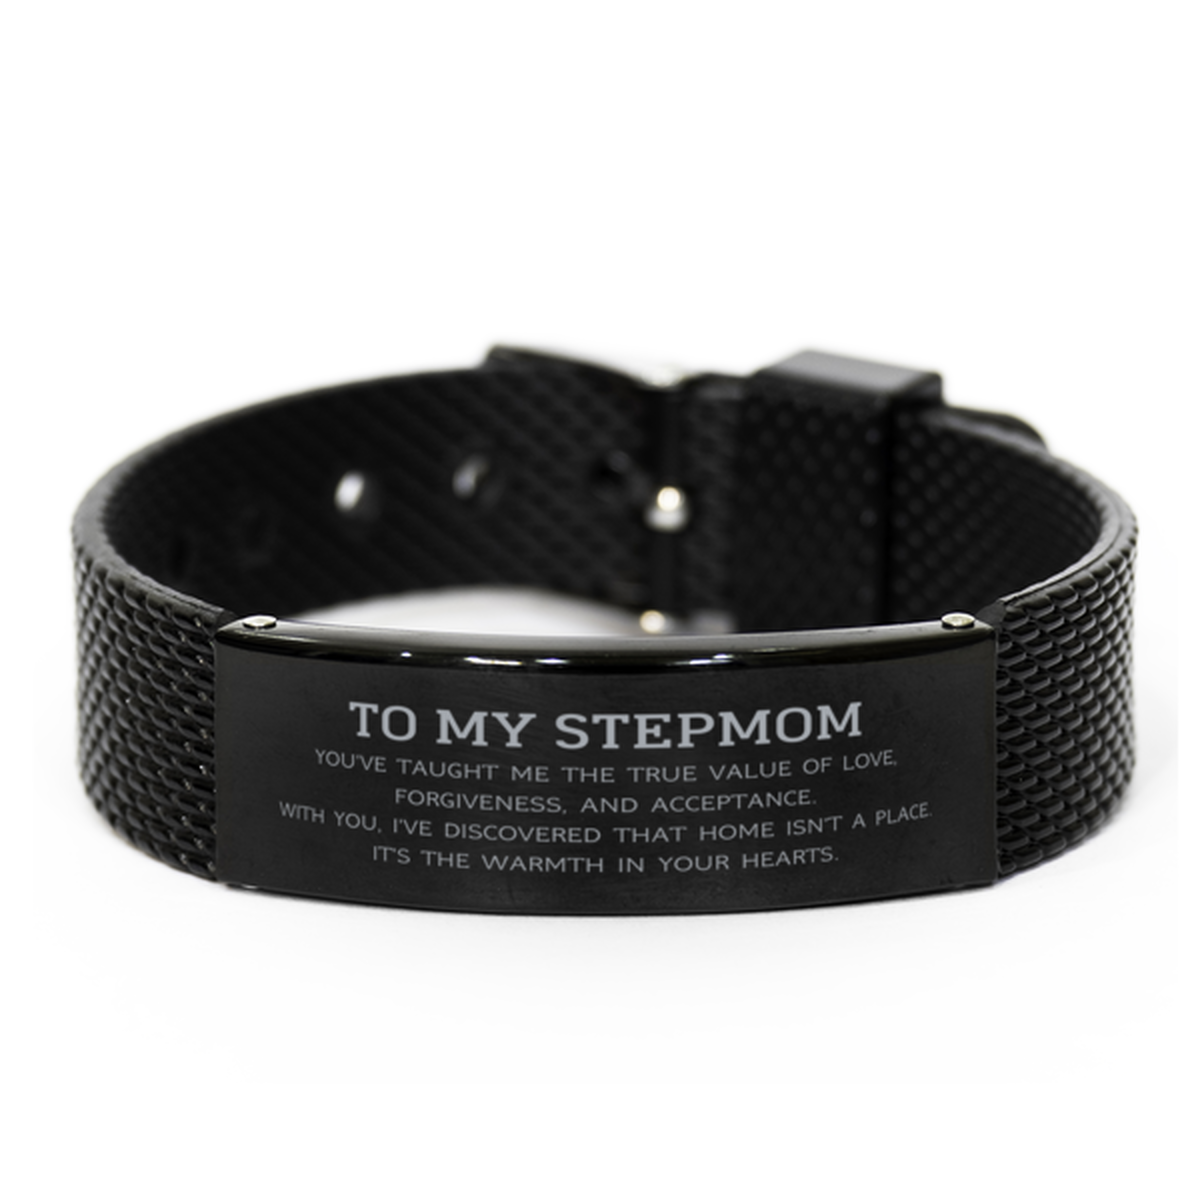 To My Stepmom Gifts, You've taught me the true value of love, Thank You Gifts For Stepmom, Birthday Black Shark Mesh Bracelet For Stepmom